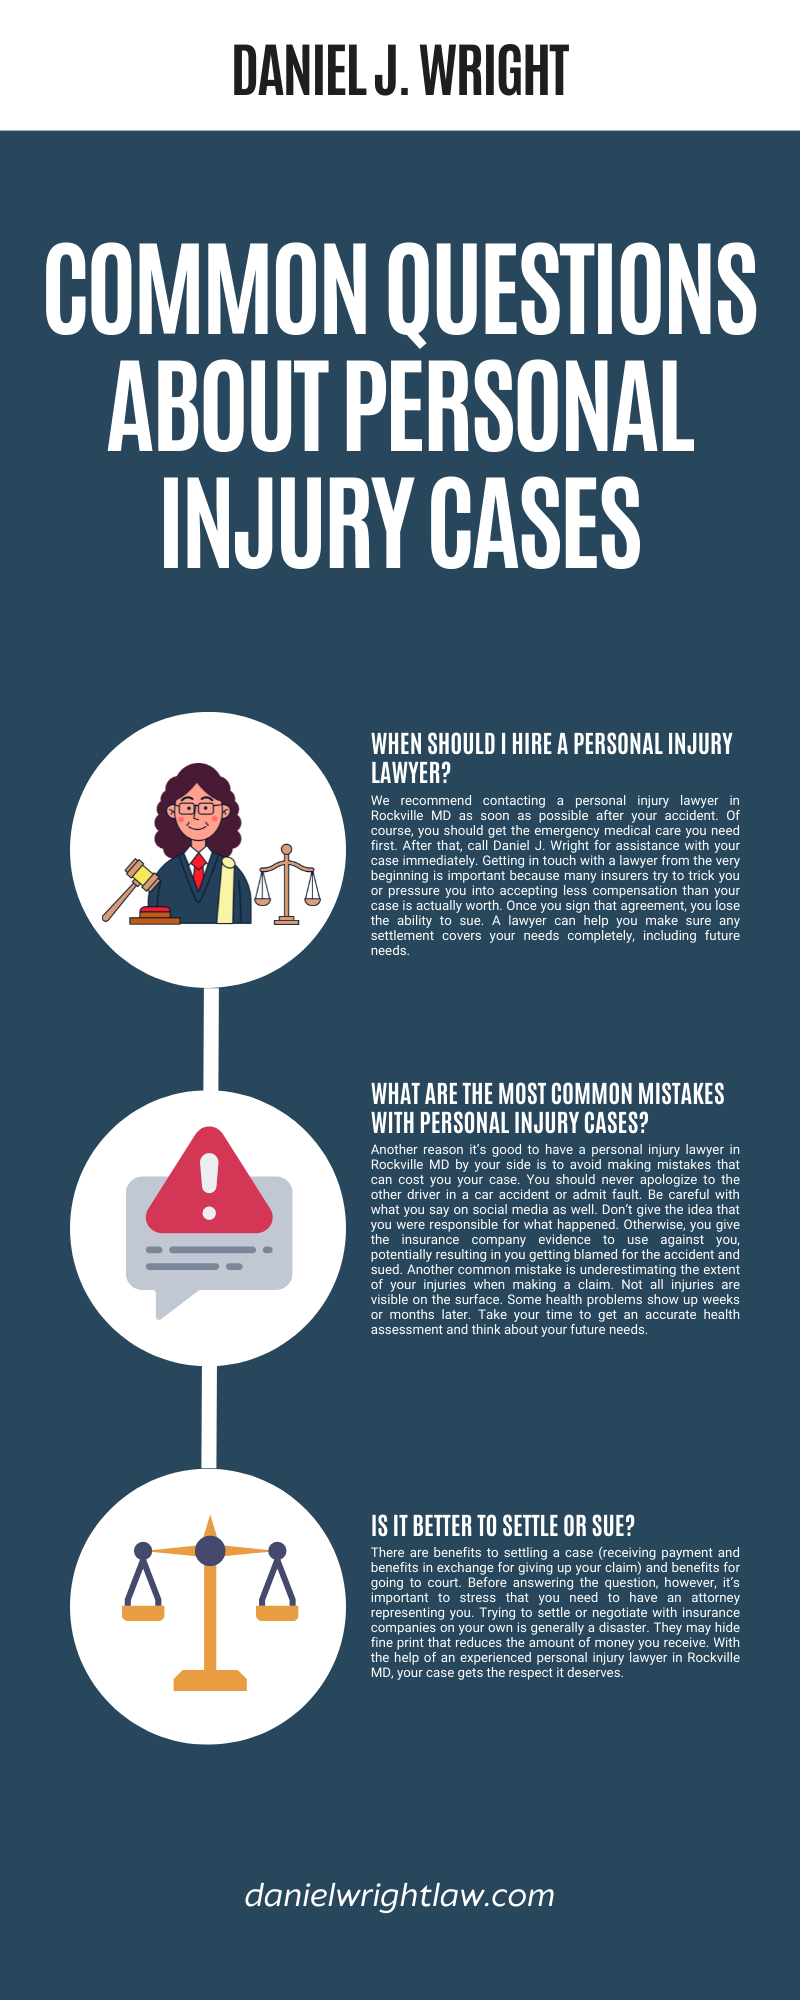 Common Questions About Personal Injury Cases